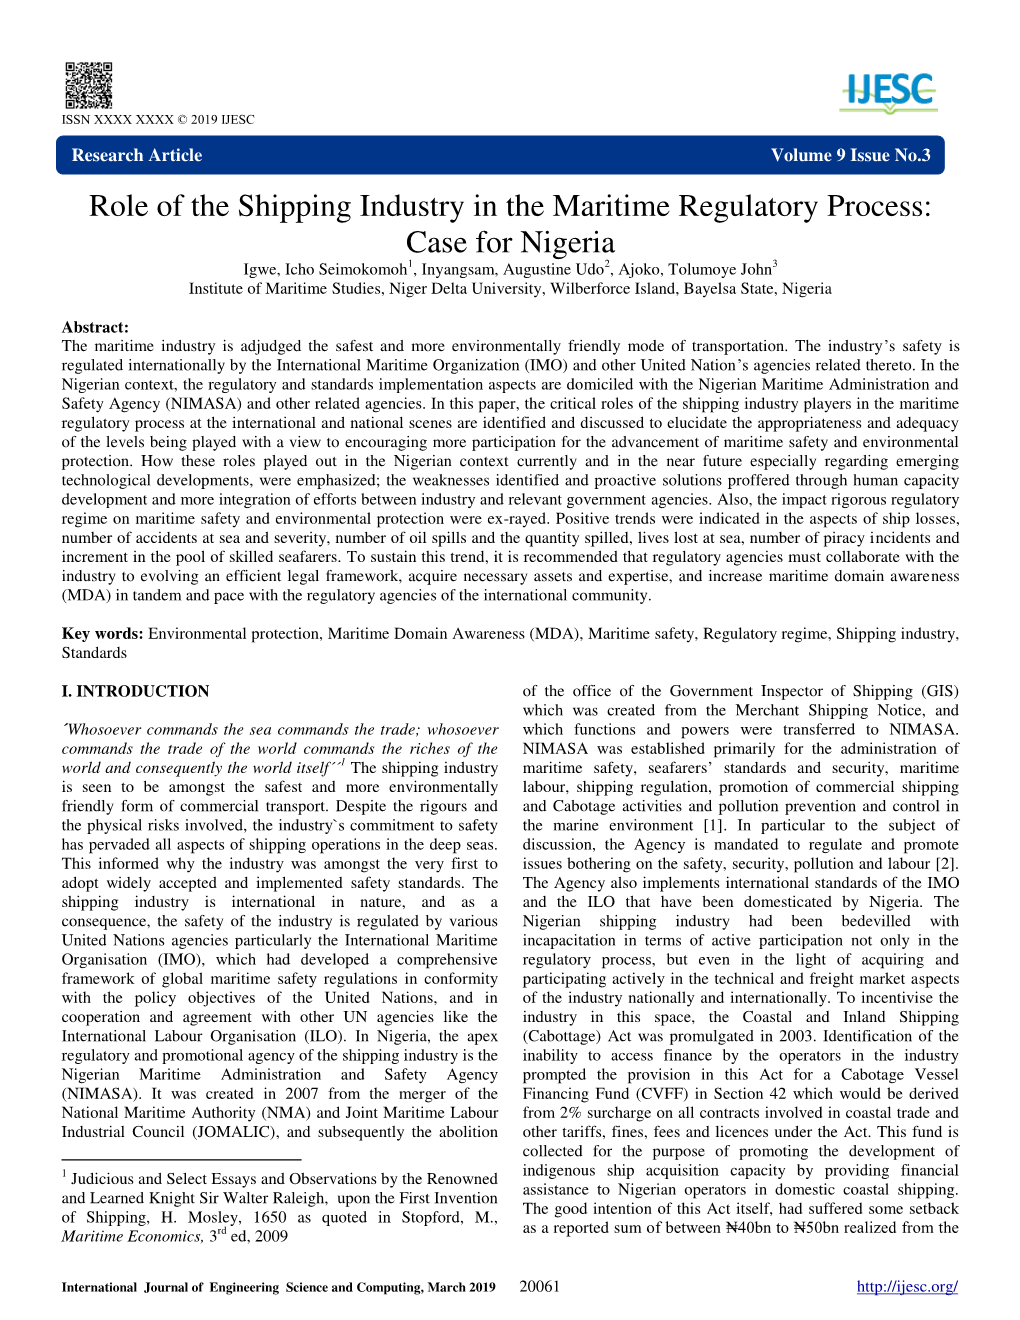 Role of the Shipping Industry in the Maritime Regulatory Process: Case